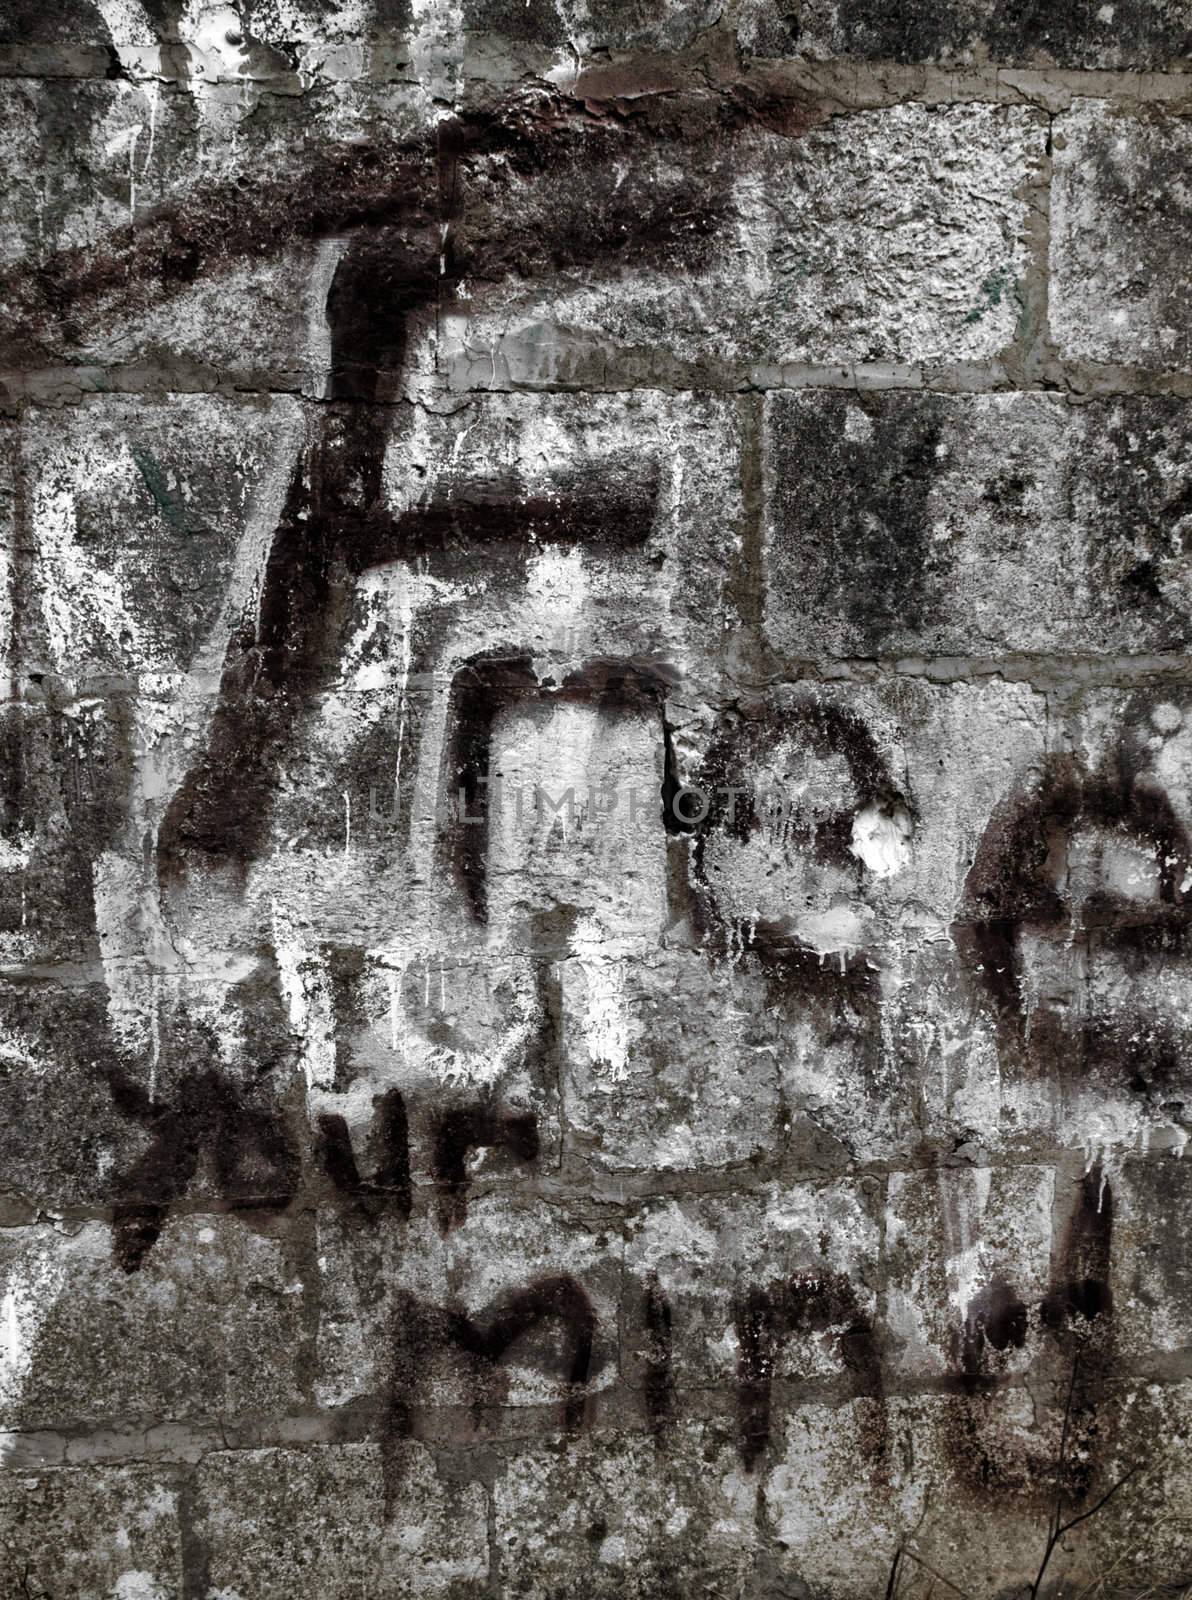 Graffiti and inscriptions on a limestone wall shot in HDR